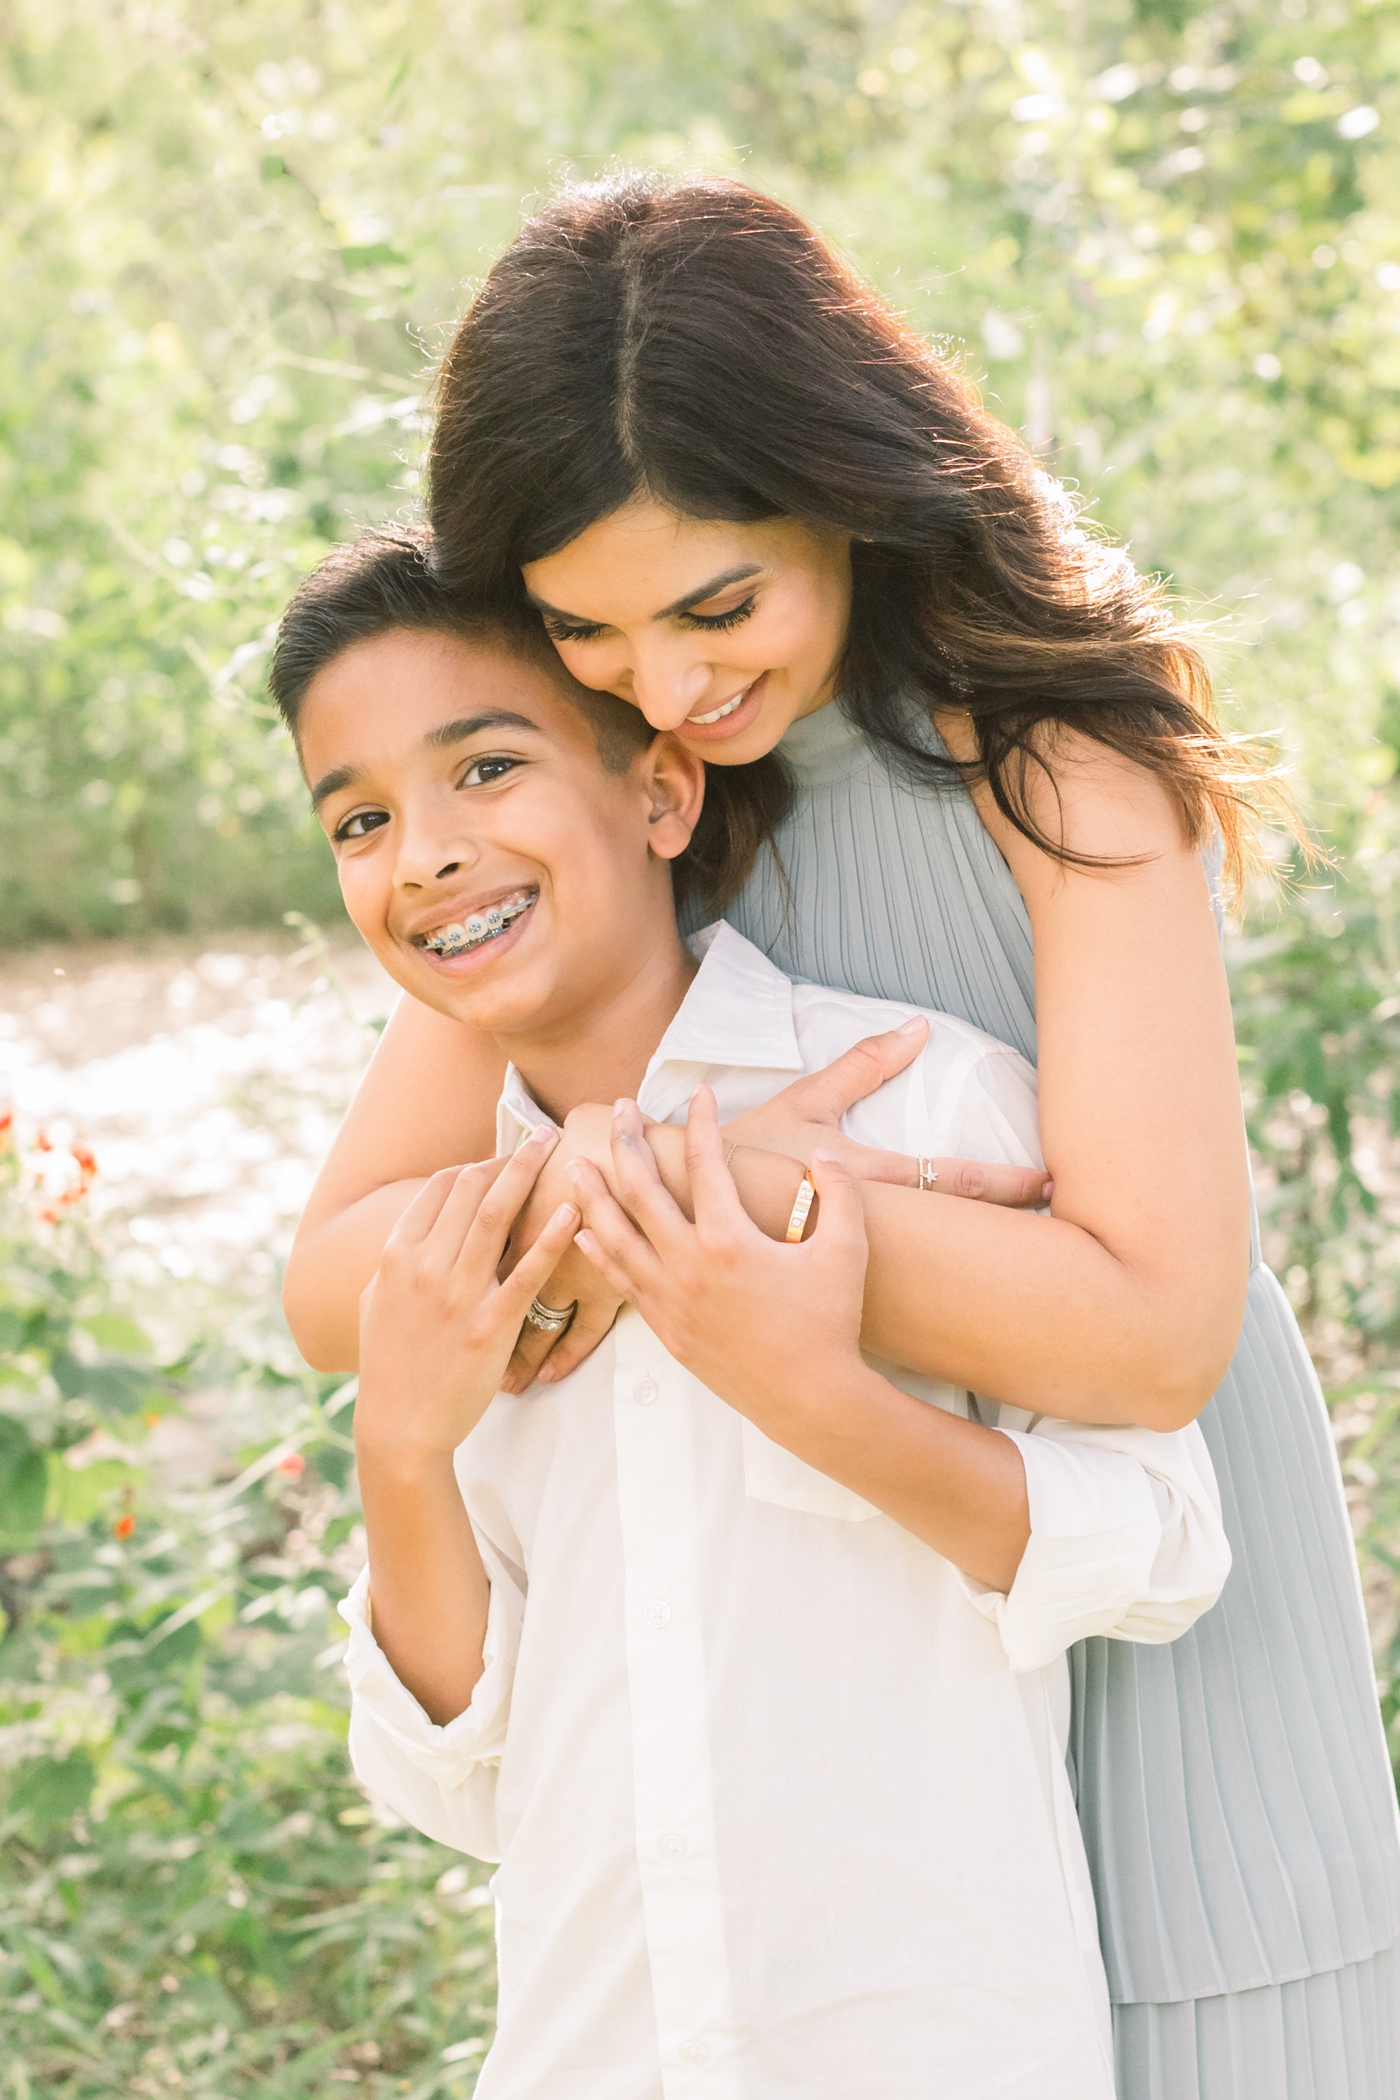 Mom hugging son during beautiful field session in Austin, TX. Photo by Sana Ahmed Photography.